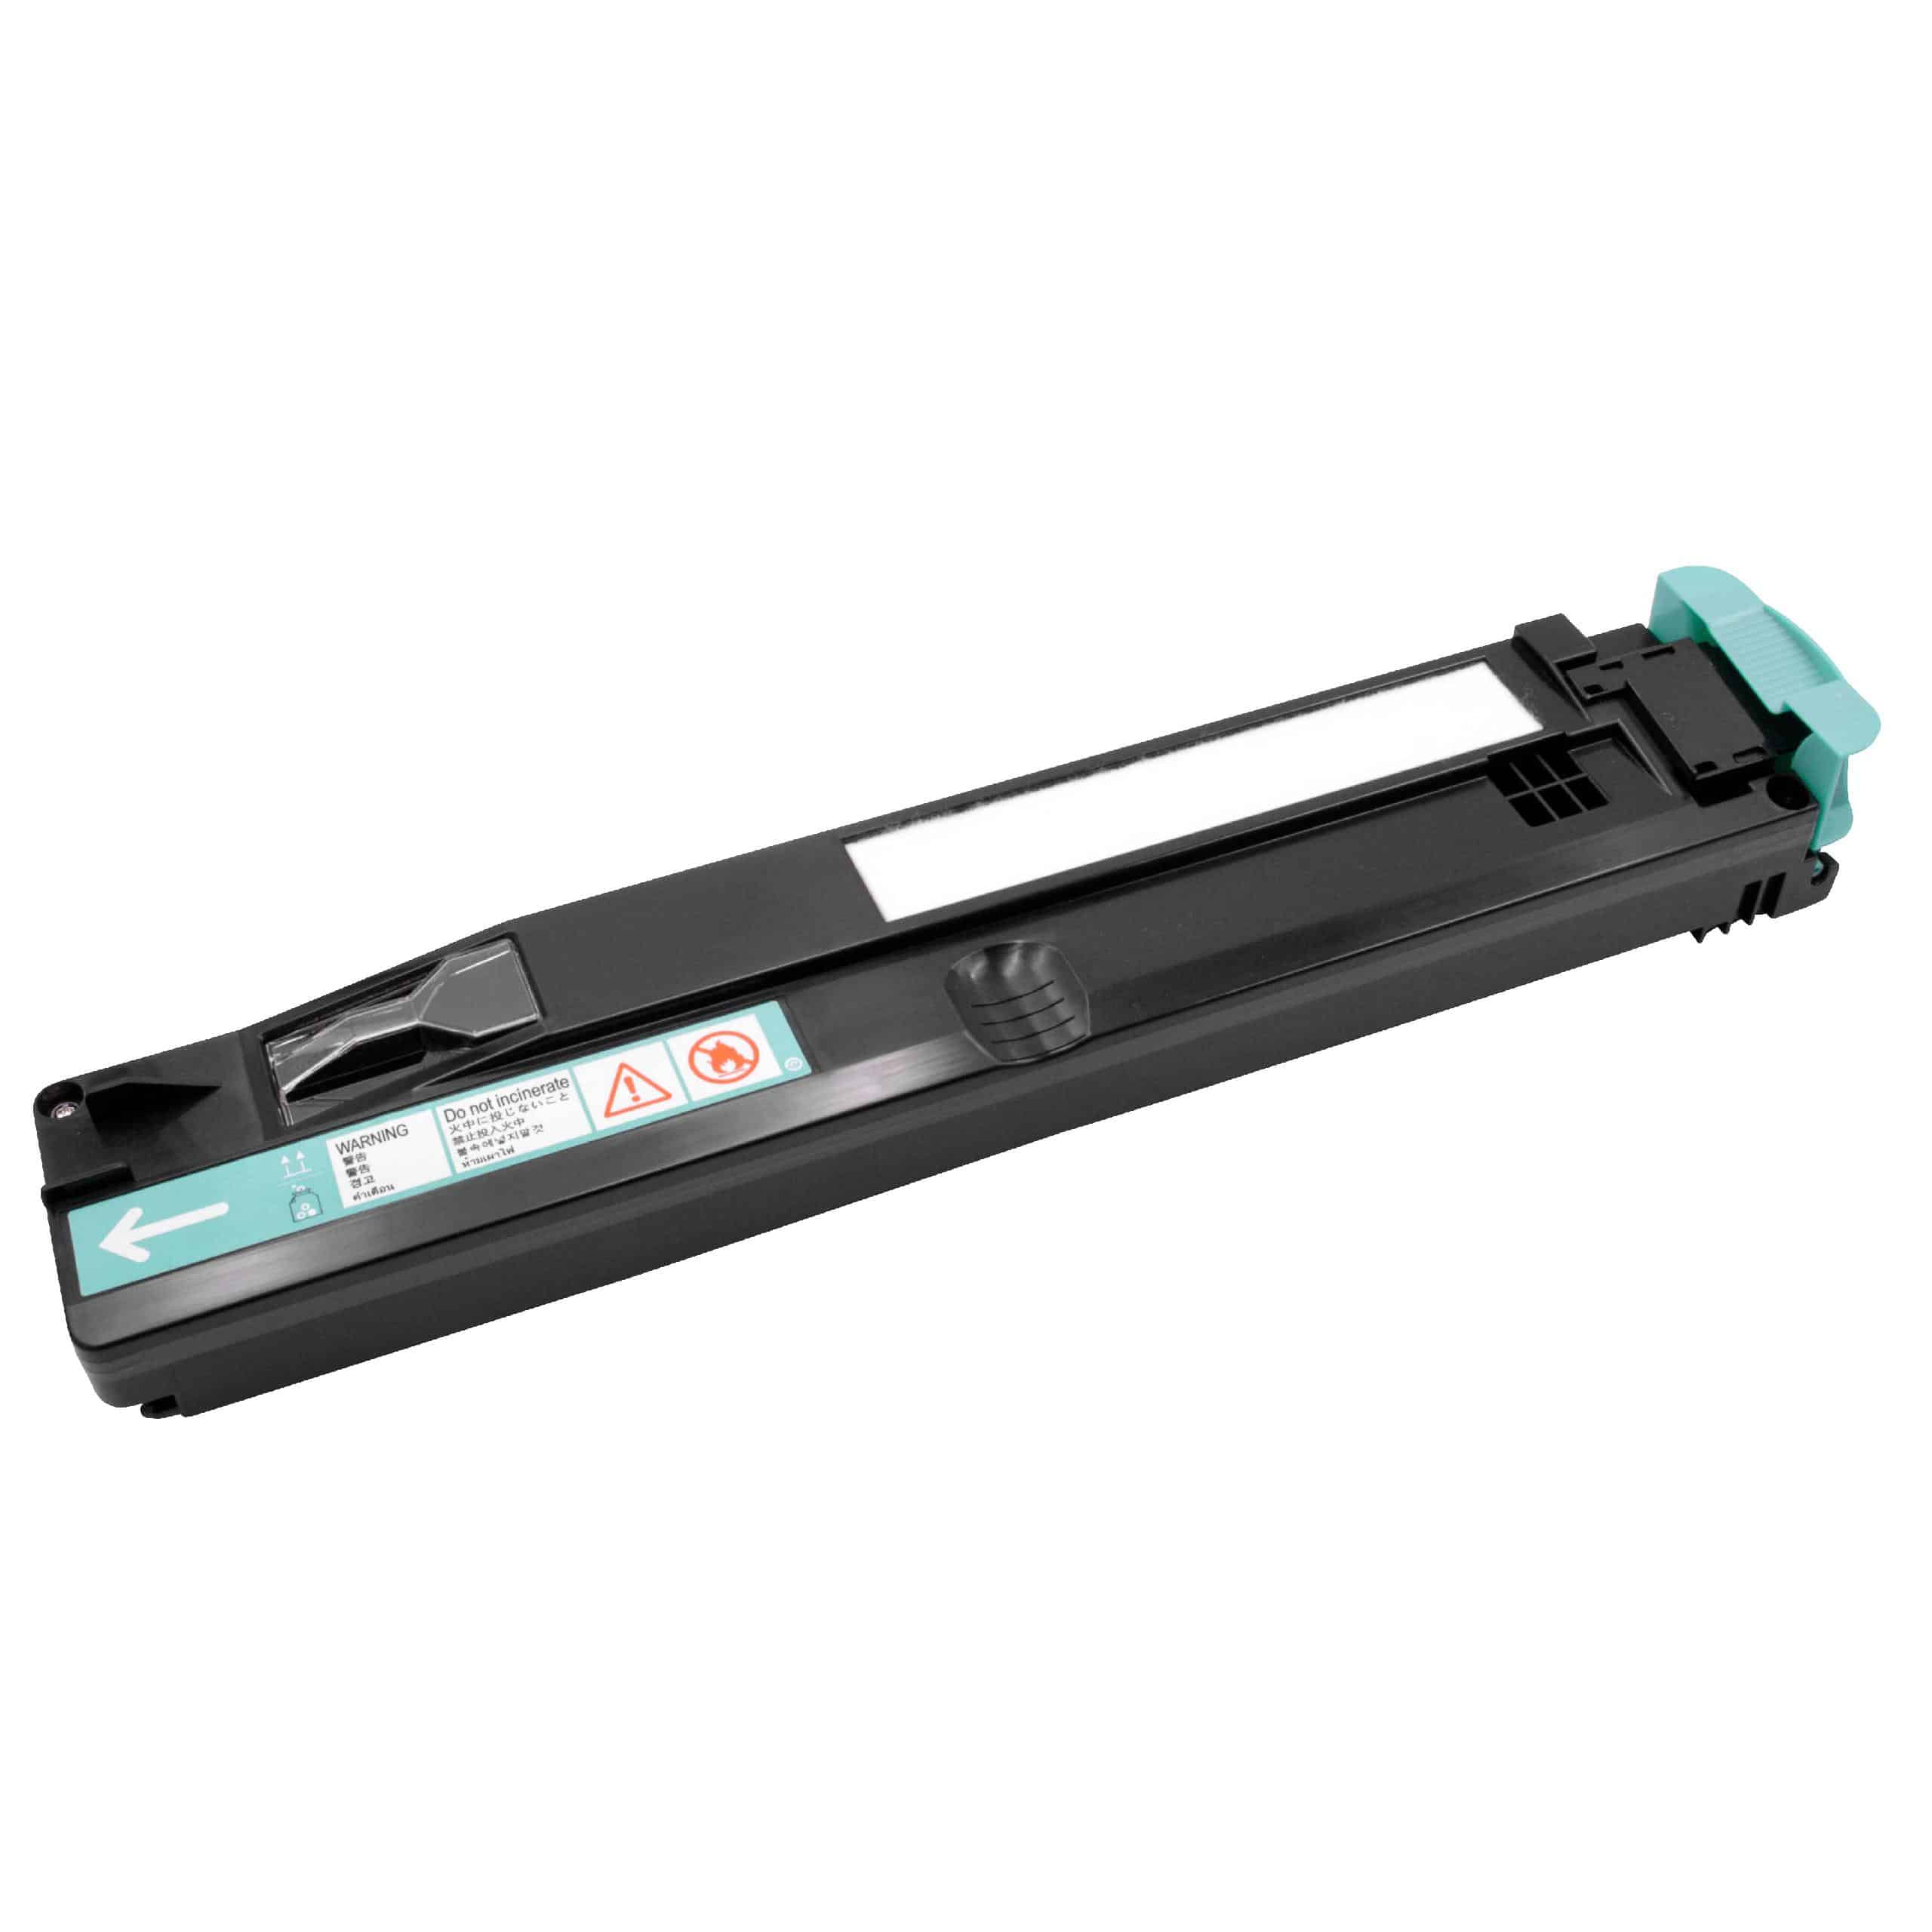 Waste Toner Container as Replacement for Xerox 108R00982, CWAA0751, 008R13061, 108R00865 - Black